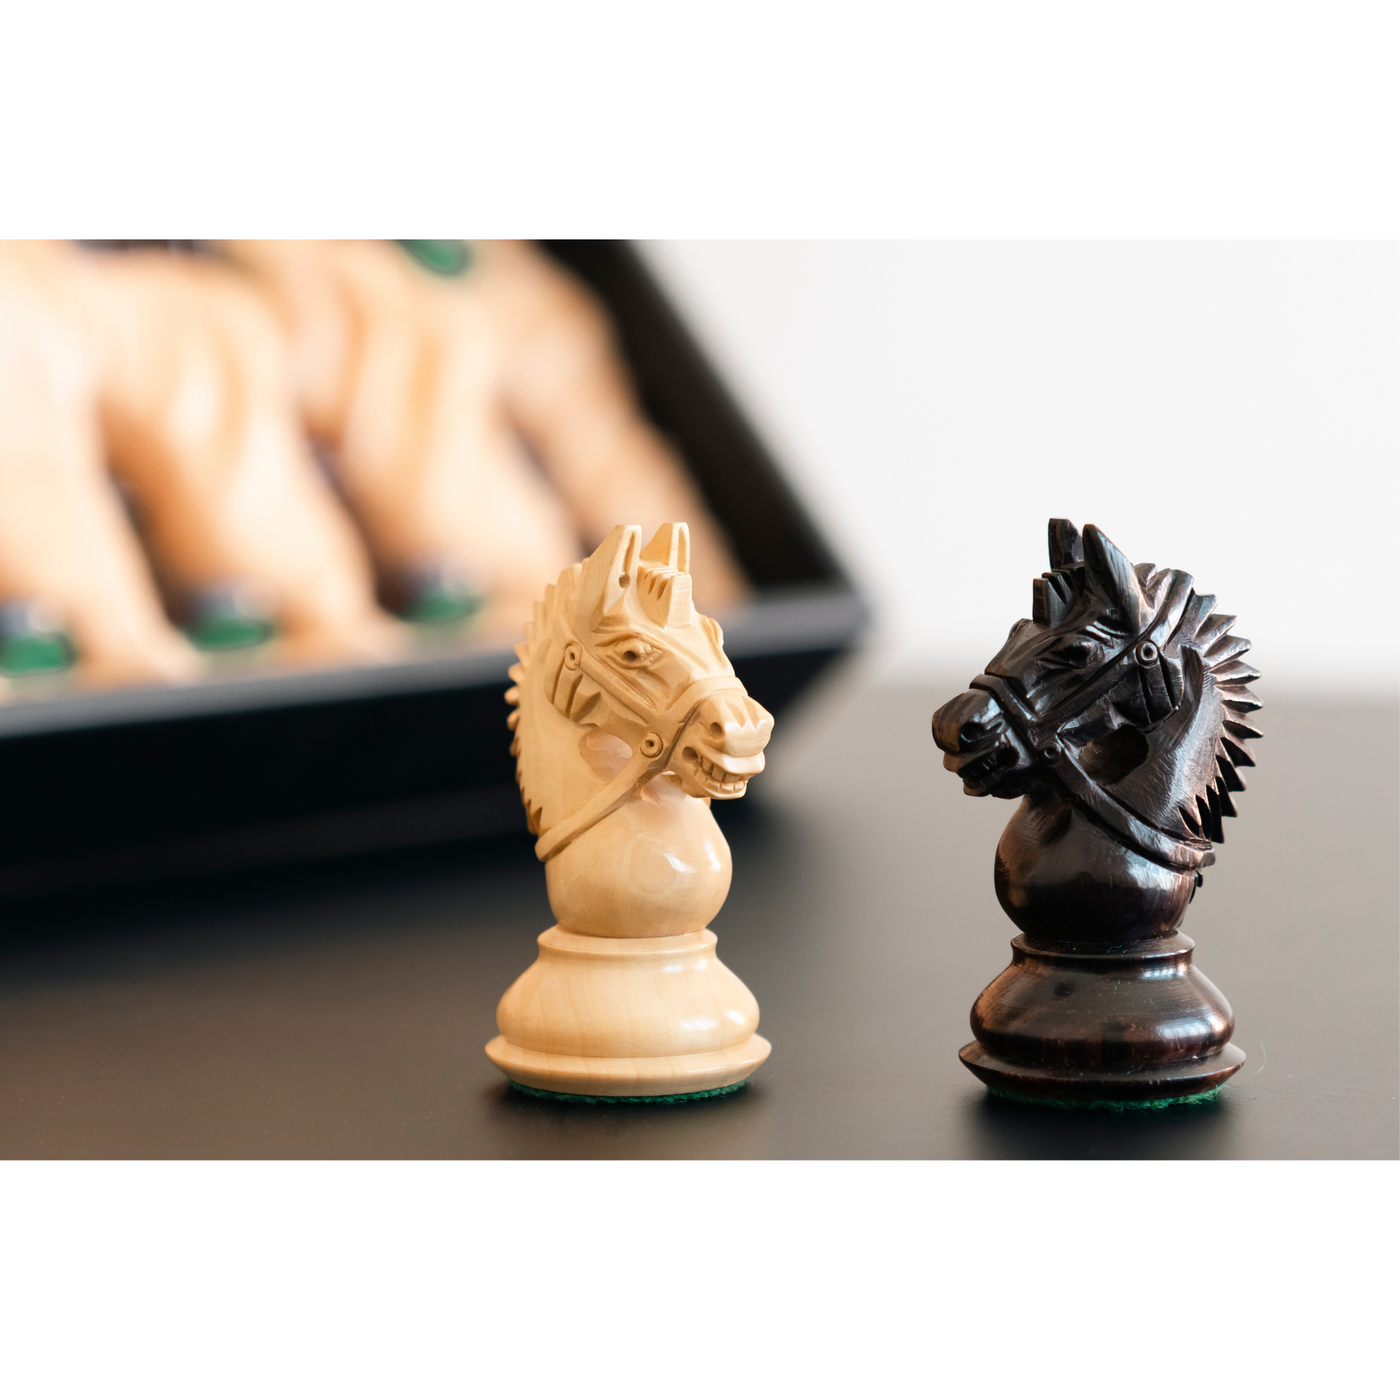 4.2 American Staunton Luxury Chess Set- Chess Pieces Only